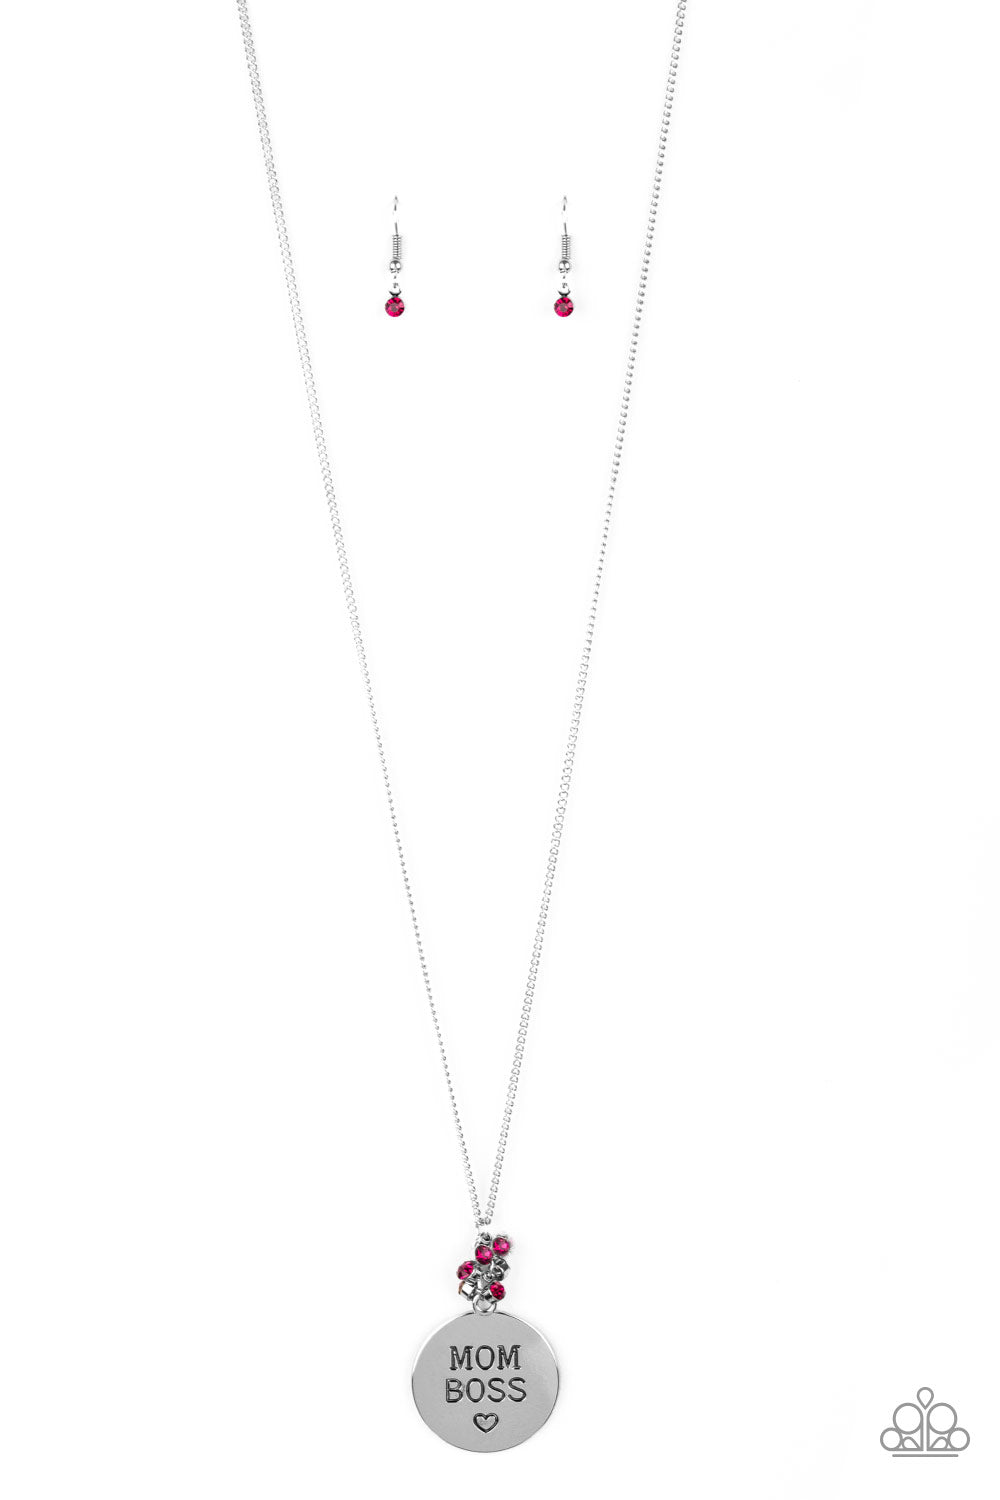 Paparazzi Accessories - Mom Boss - Pink & Silver Necklace